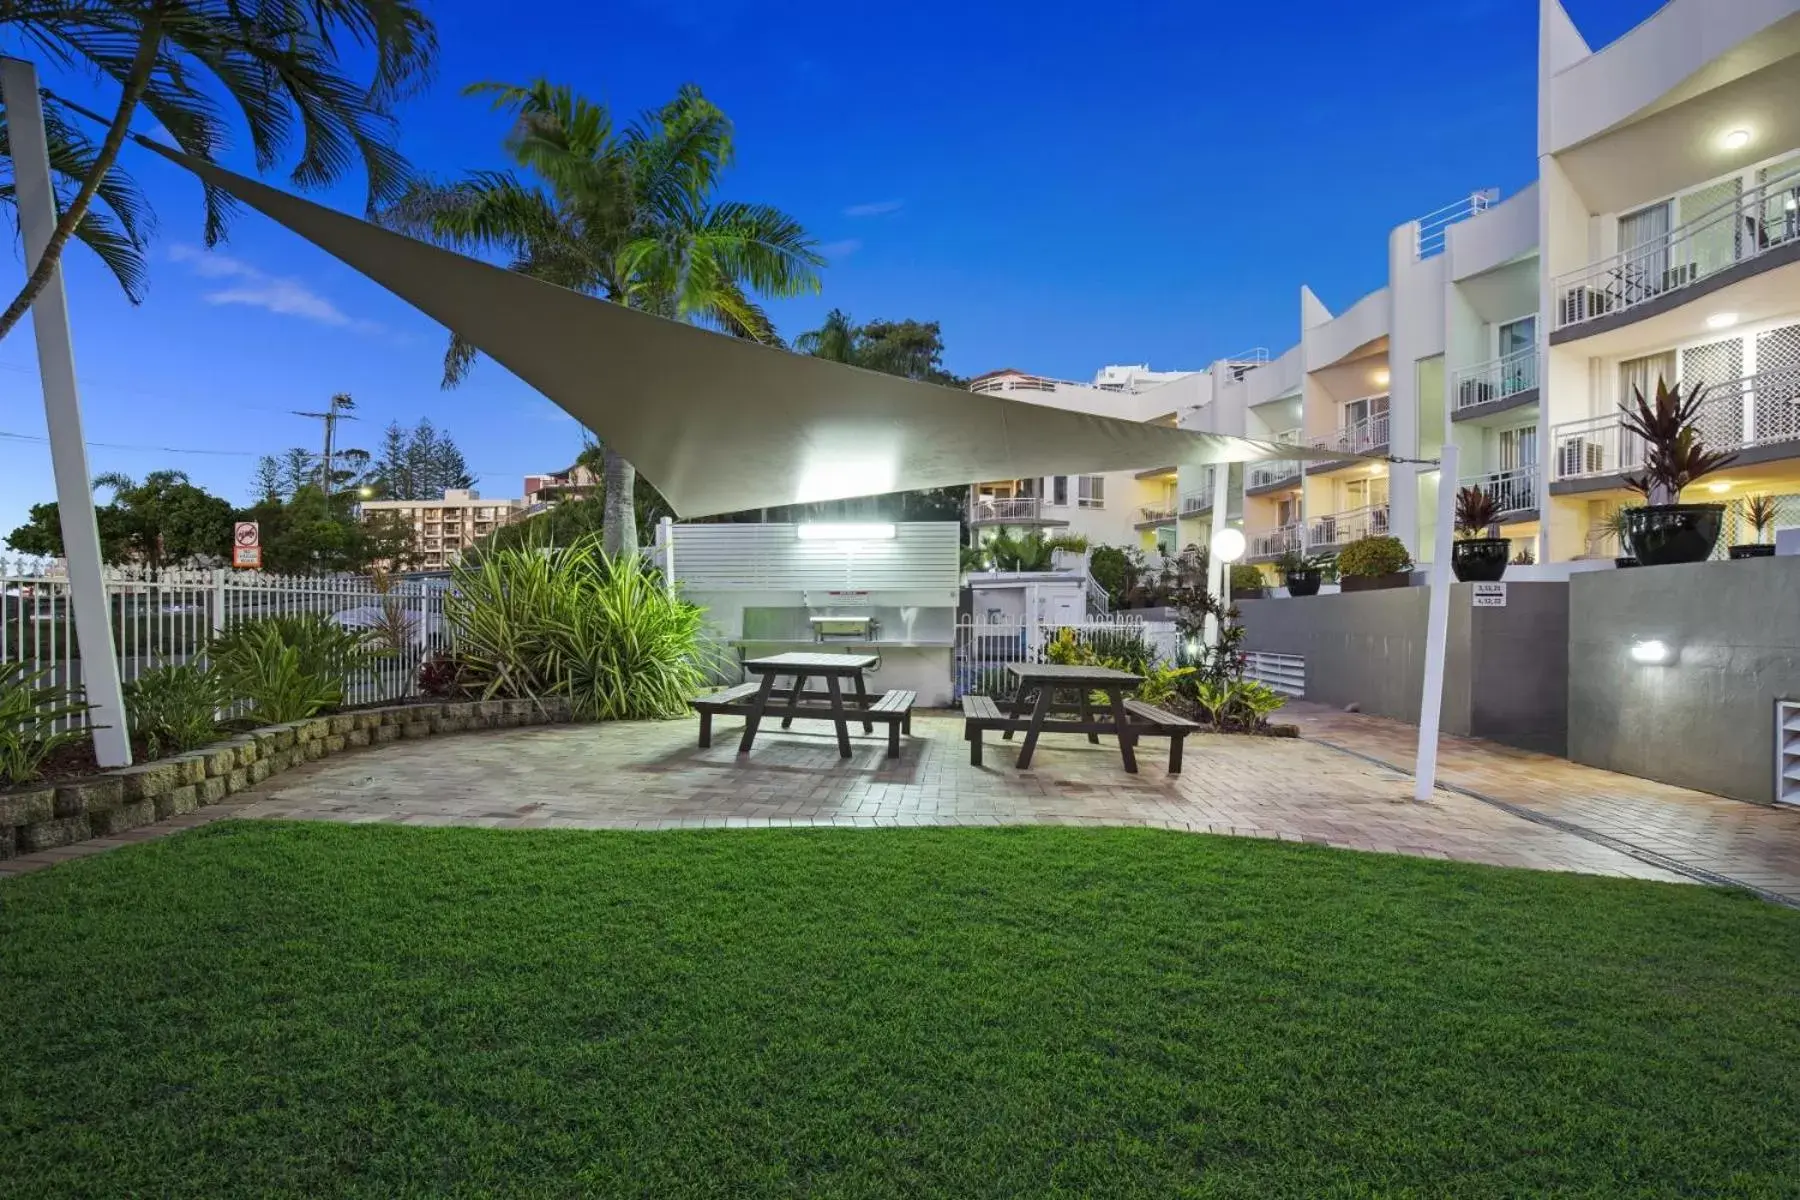 Property building in Kirra Palms Holiday Apartments